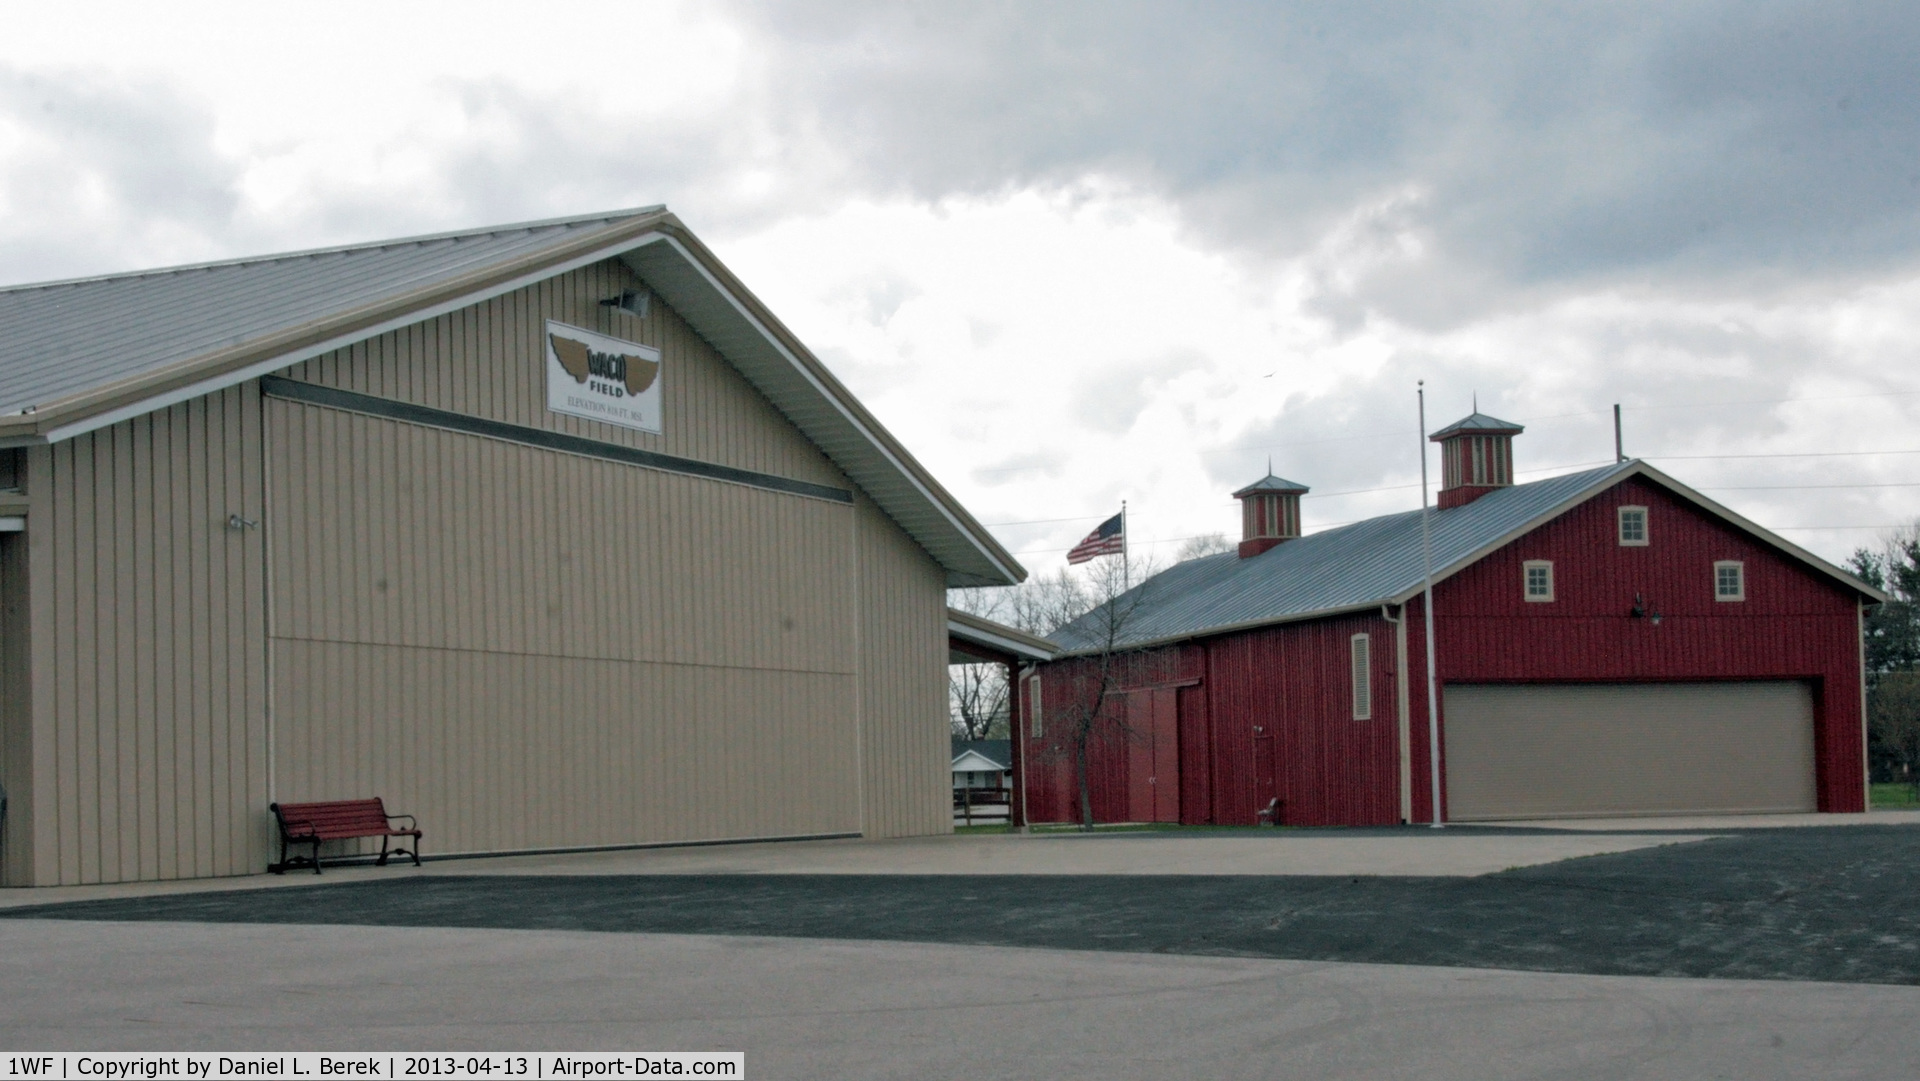 Waco Field Airport (1WF) - The old building on the right was the birthplace of Waco airplanes; the building on the left houses the Waco Aircraft Museum.